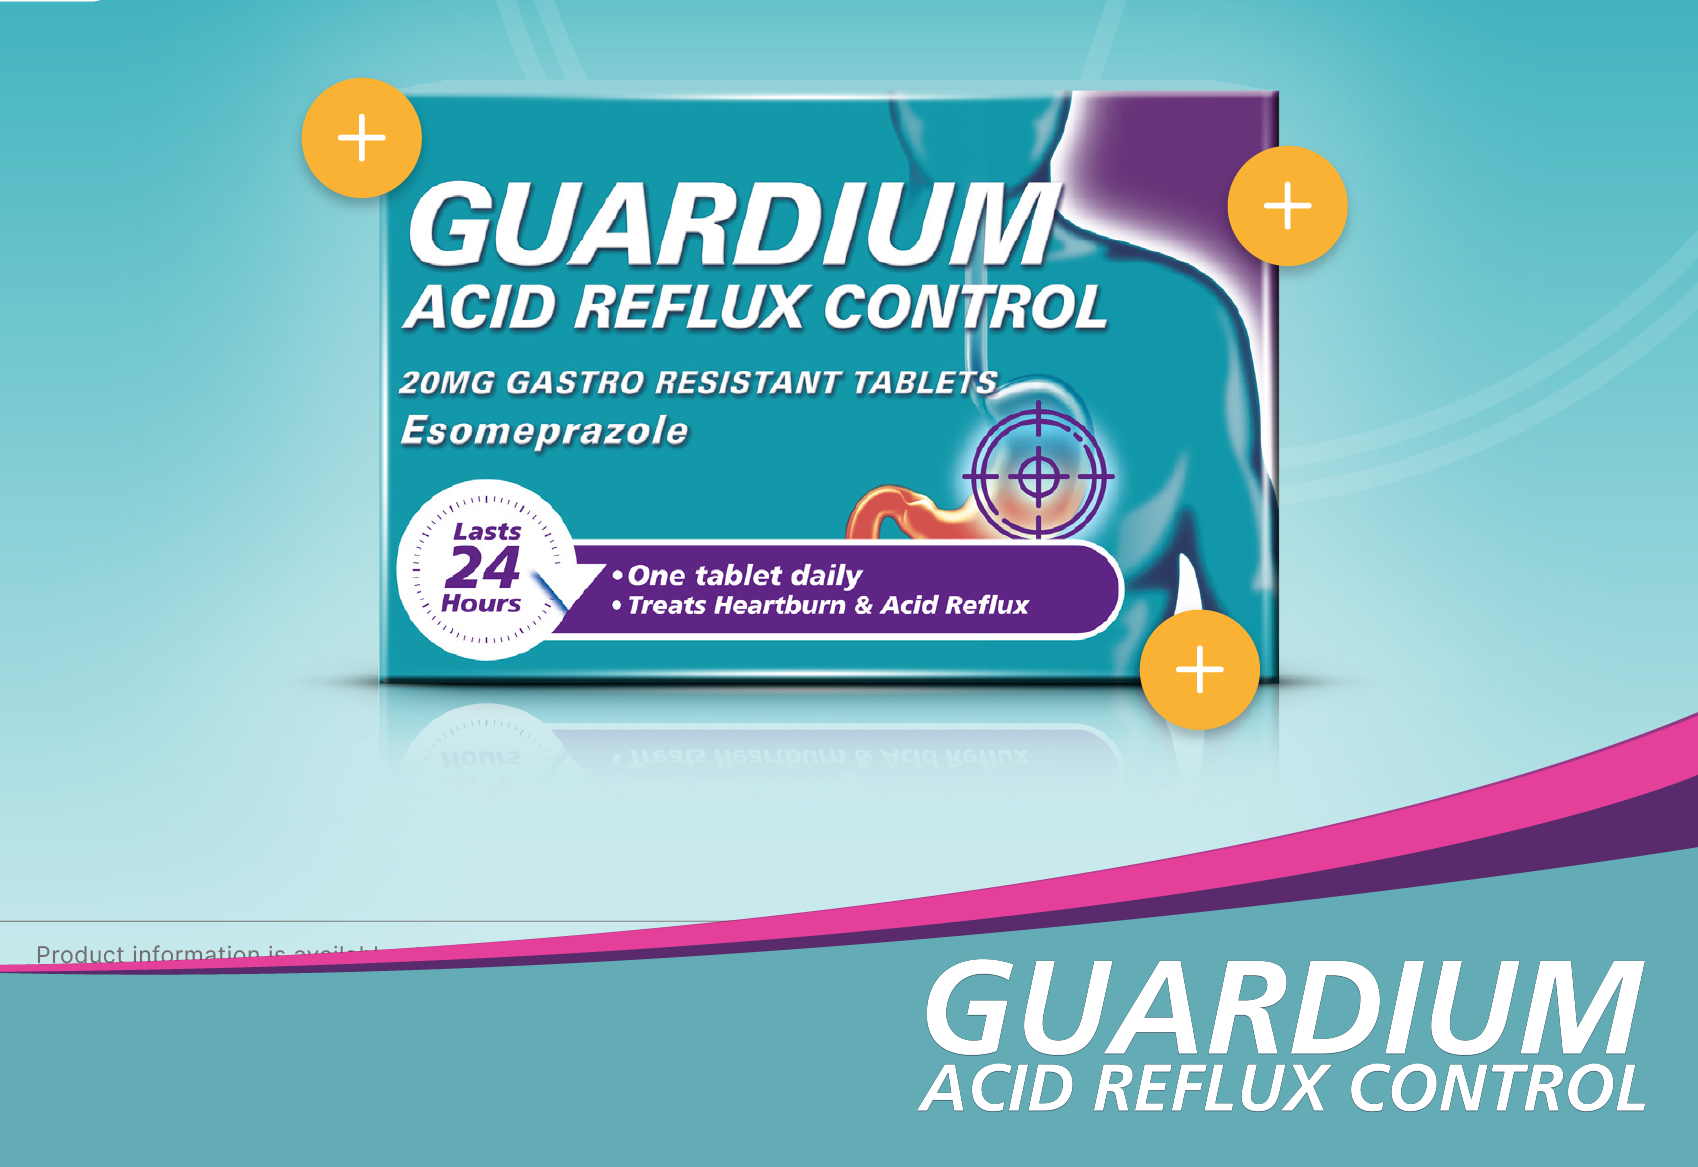 Supporting customers to manage heartburn & acid reflux symptoms